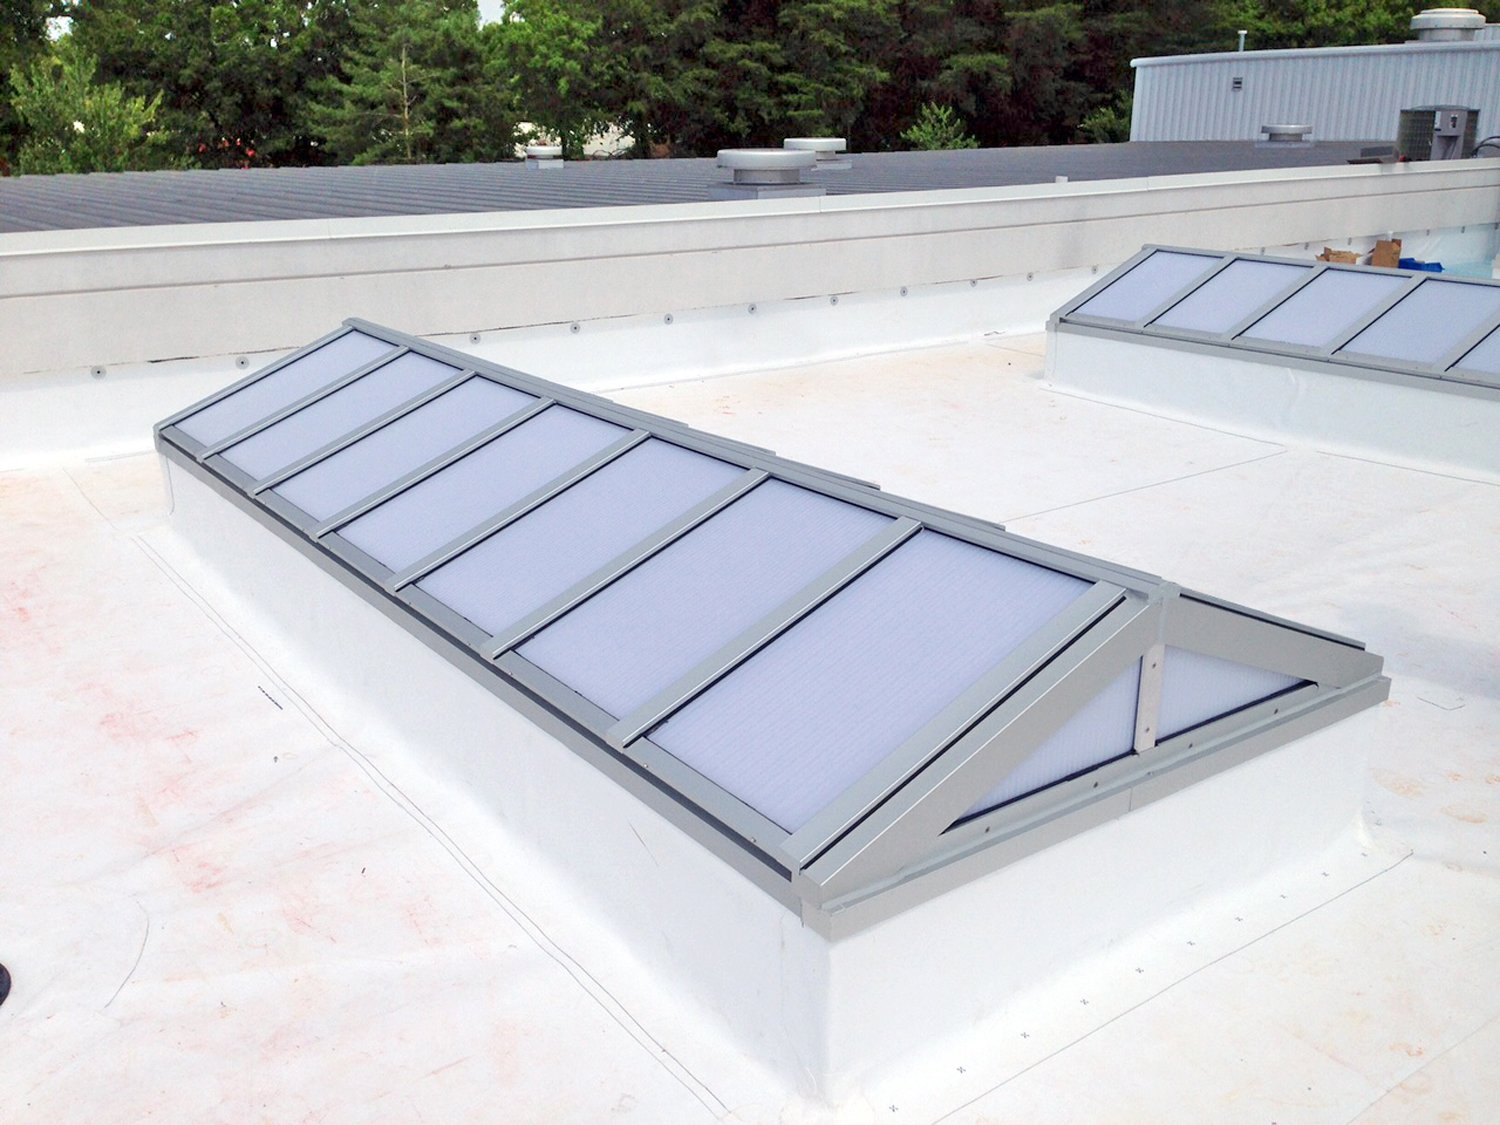 Application--CCDP-2526-Retail-Structural-Skylights-Translucent-S-Series-Skylights-0121.jpg